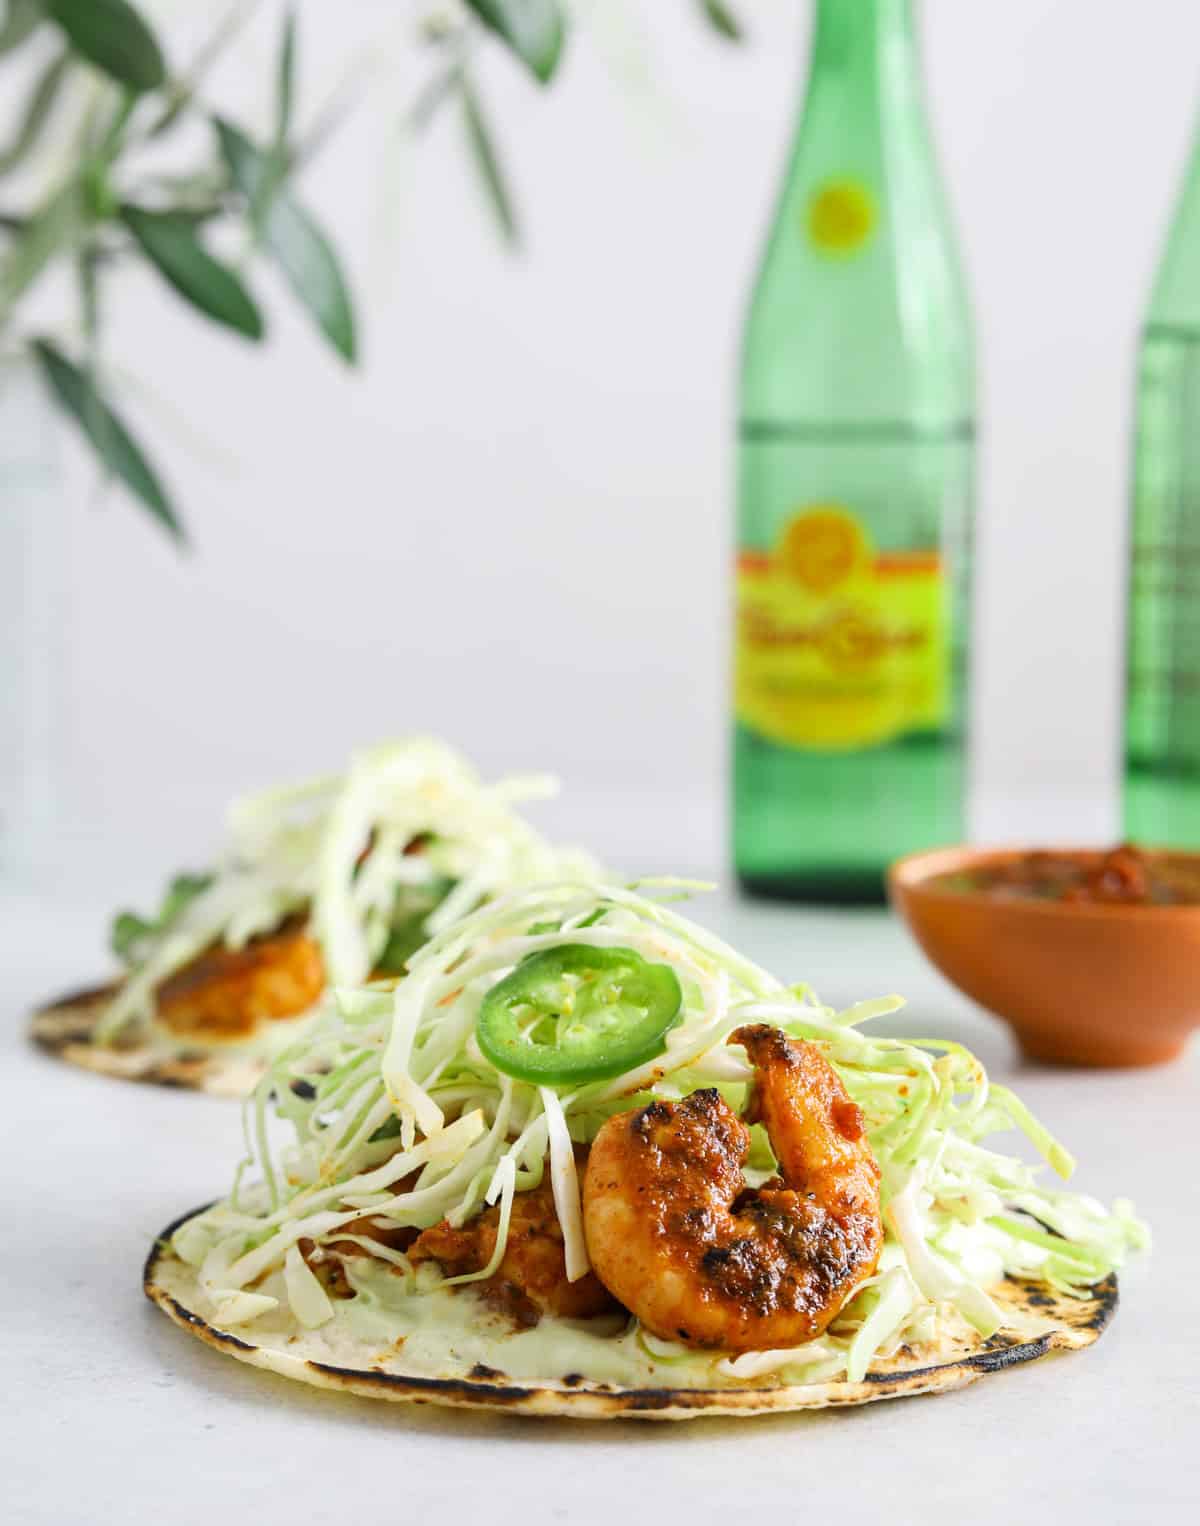 A close up image of a taco with shrimp and cabbage. Two green bottles of Topo Chico mineral water in the background.